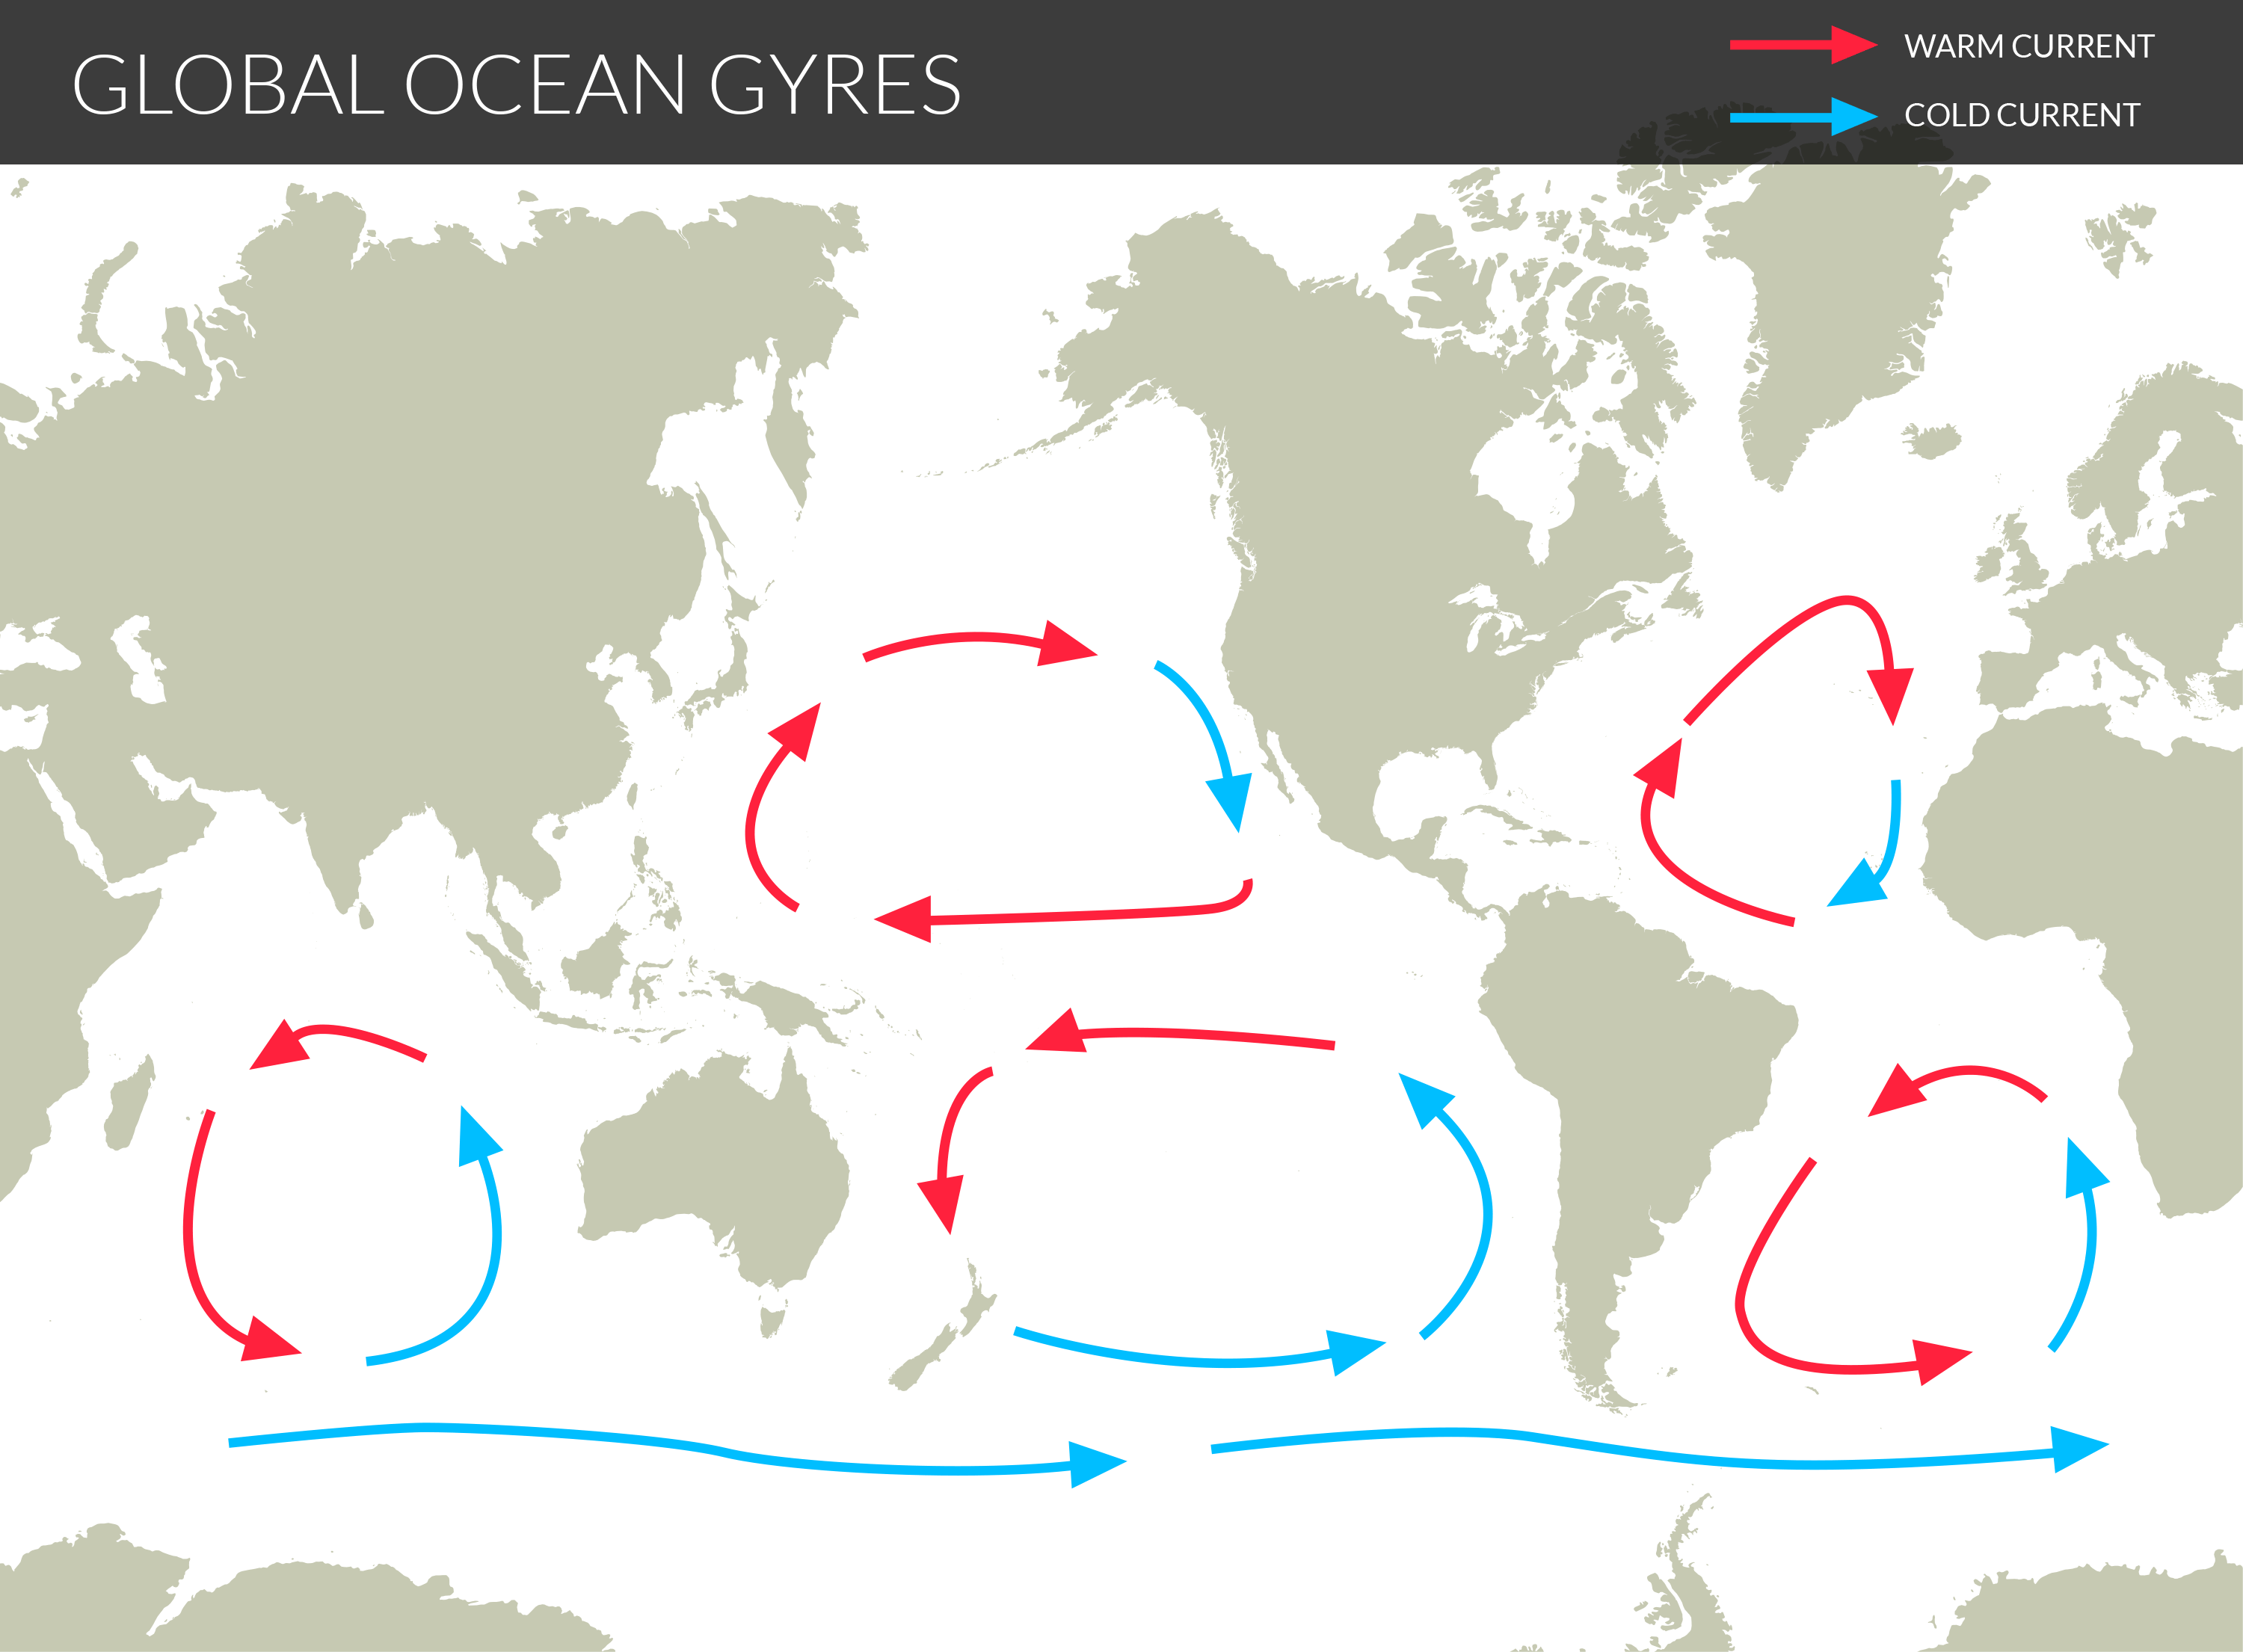 Illustrated map of ocean gyres